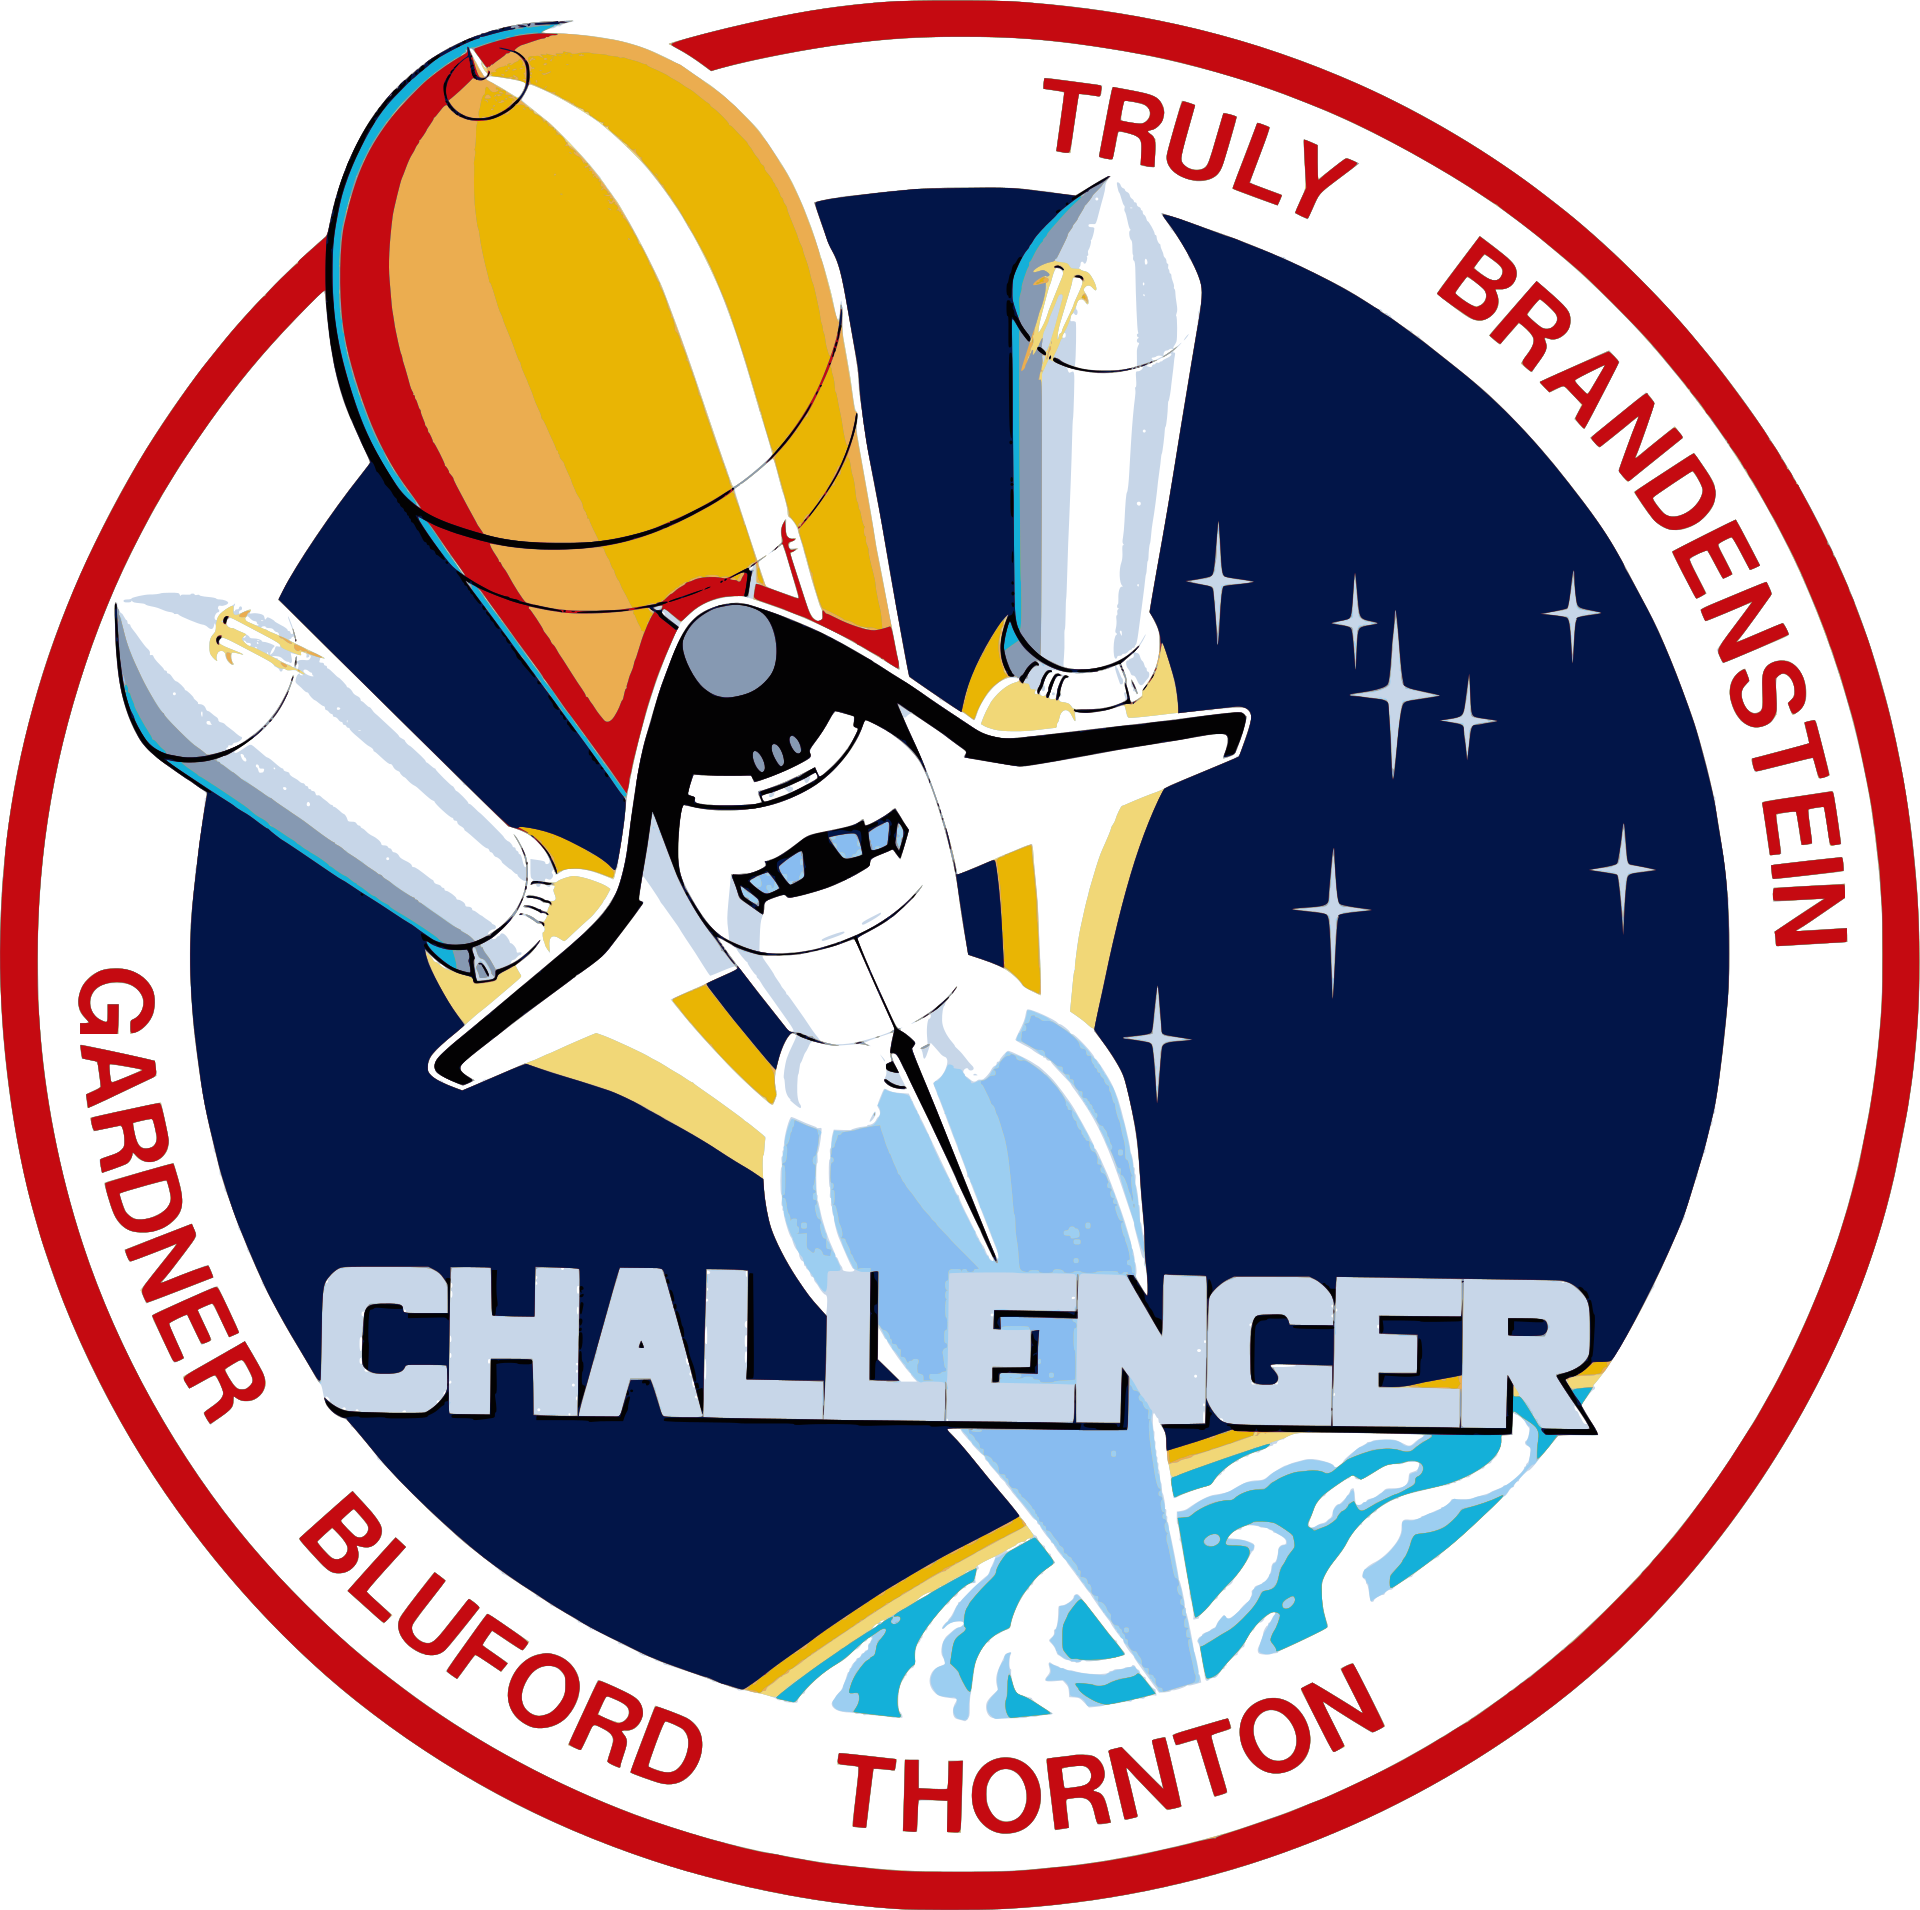 Mission patch for STS-8